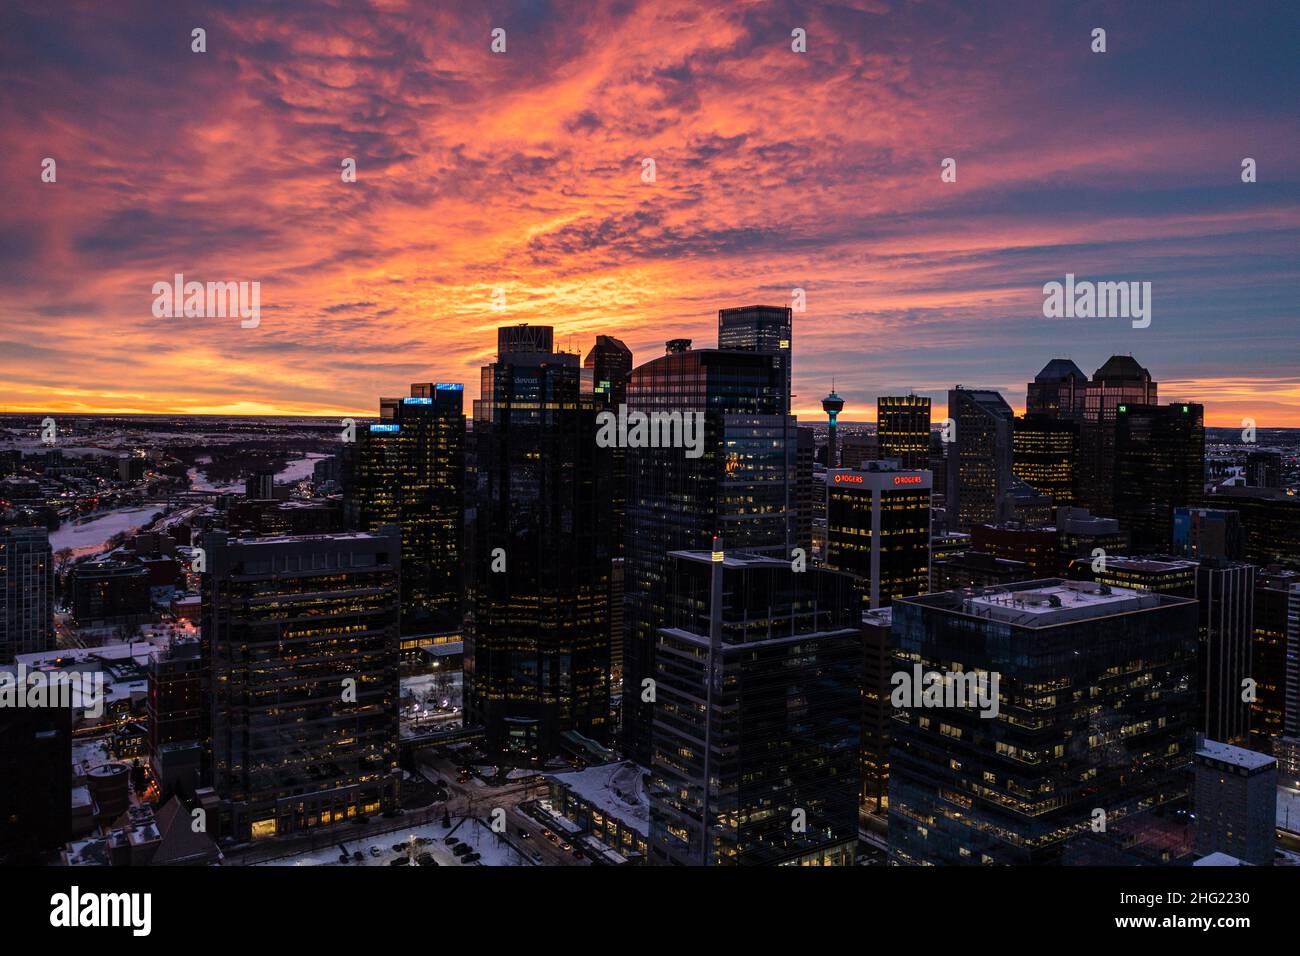 Fiery Sunrise Over Downtown Calgary During Winter Stock Photo